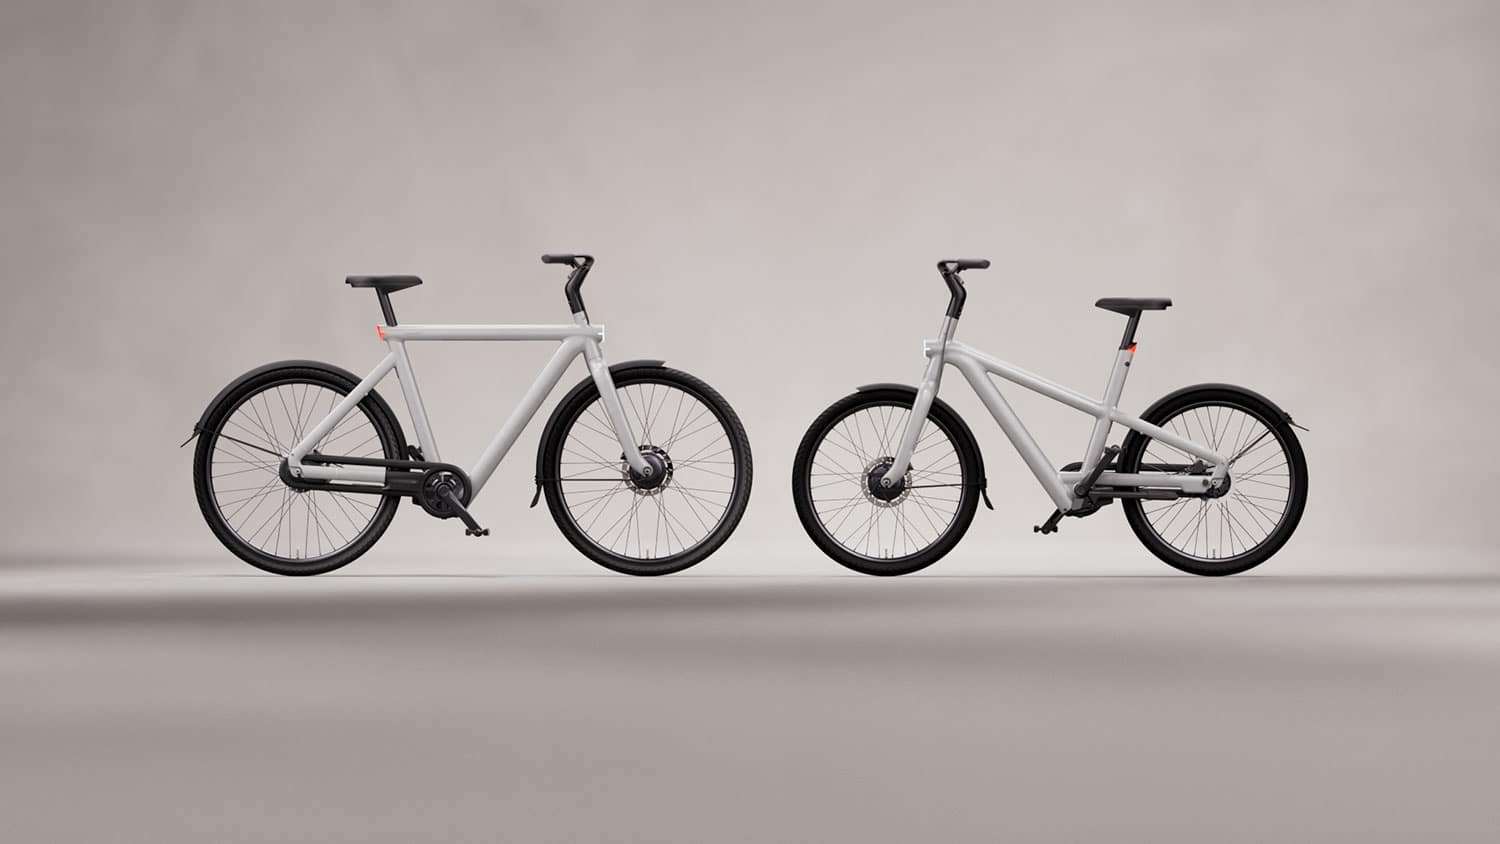 VanMoof reveals its next gen e-bikes - VanMoof S5 and A5 - with long-awaited step-in frame.